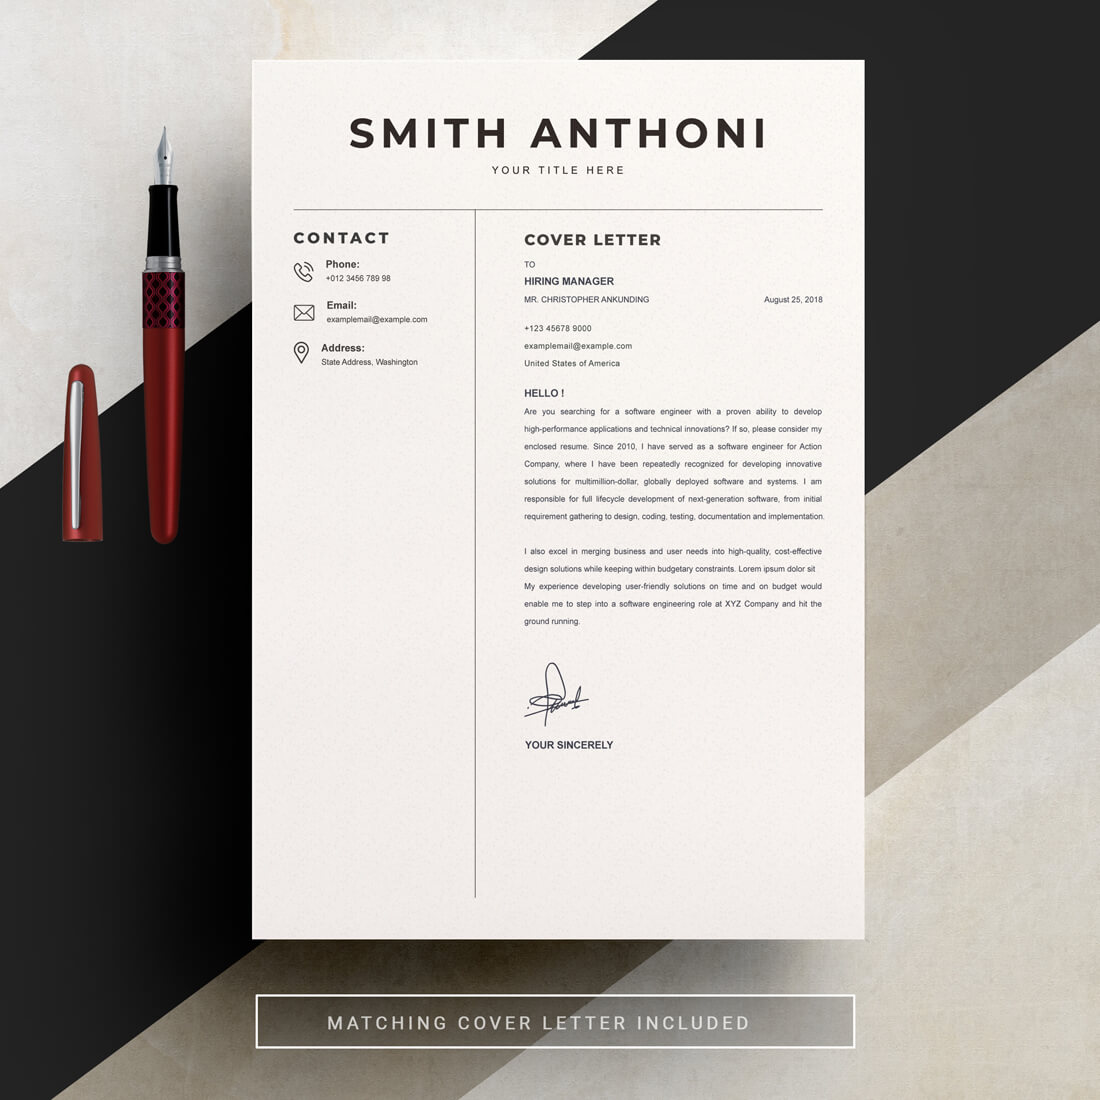 04 resume cover letter page free resume design template 4 365